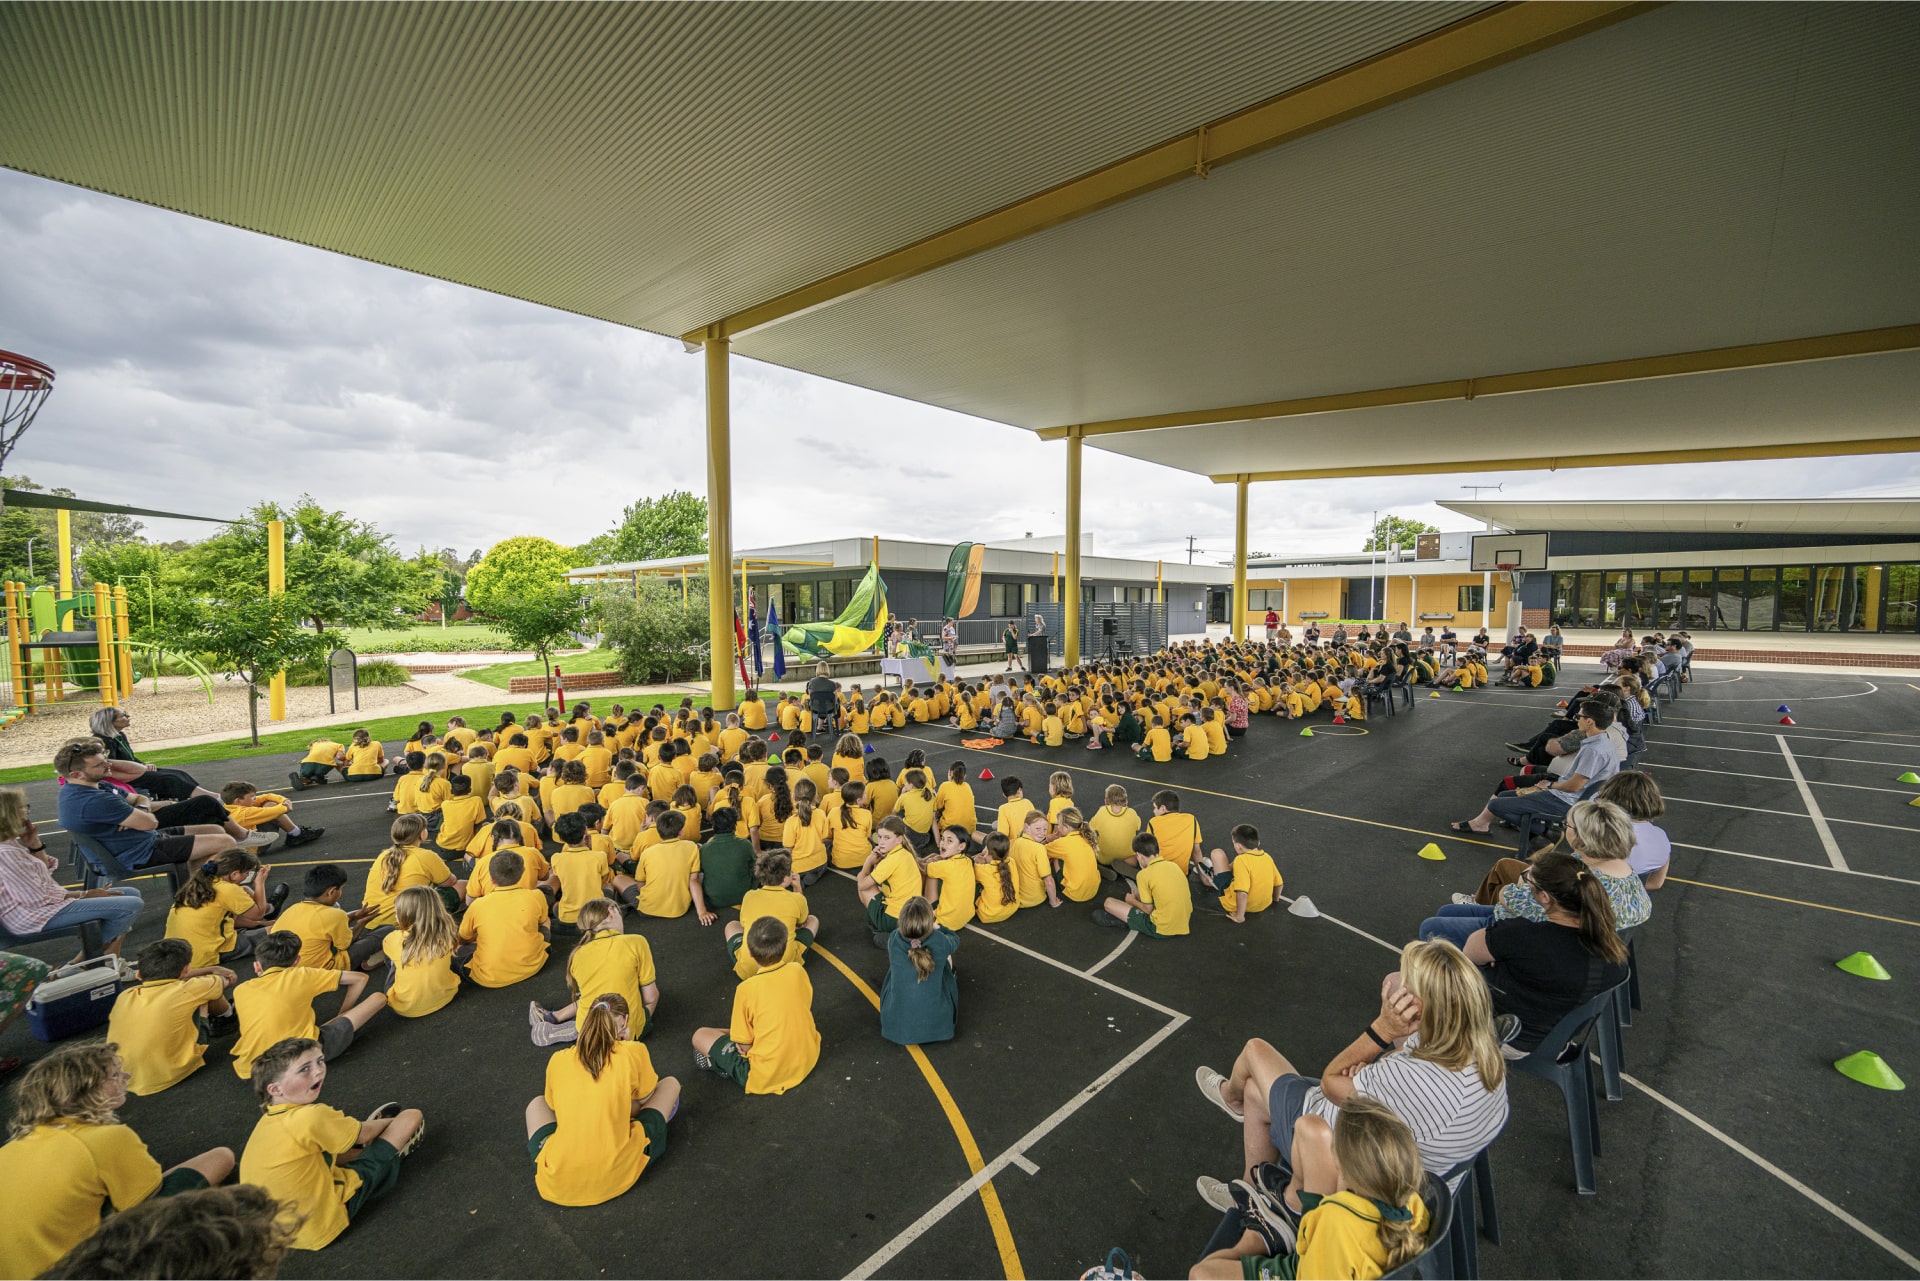 St Bernards Primary School students under steel court cover shade structure